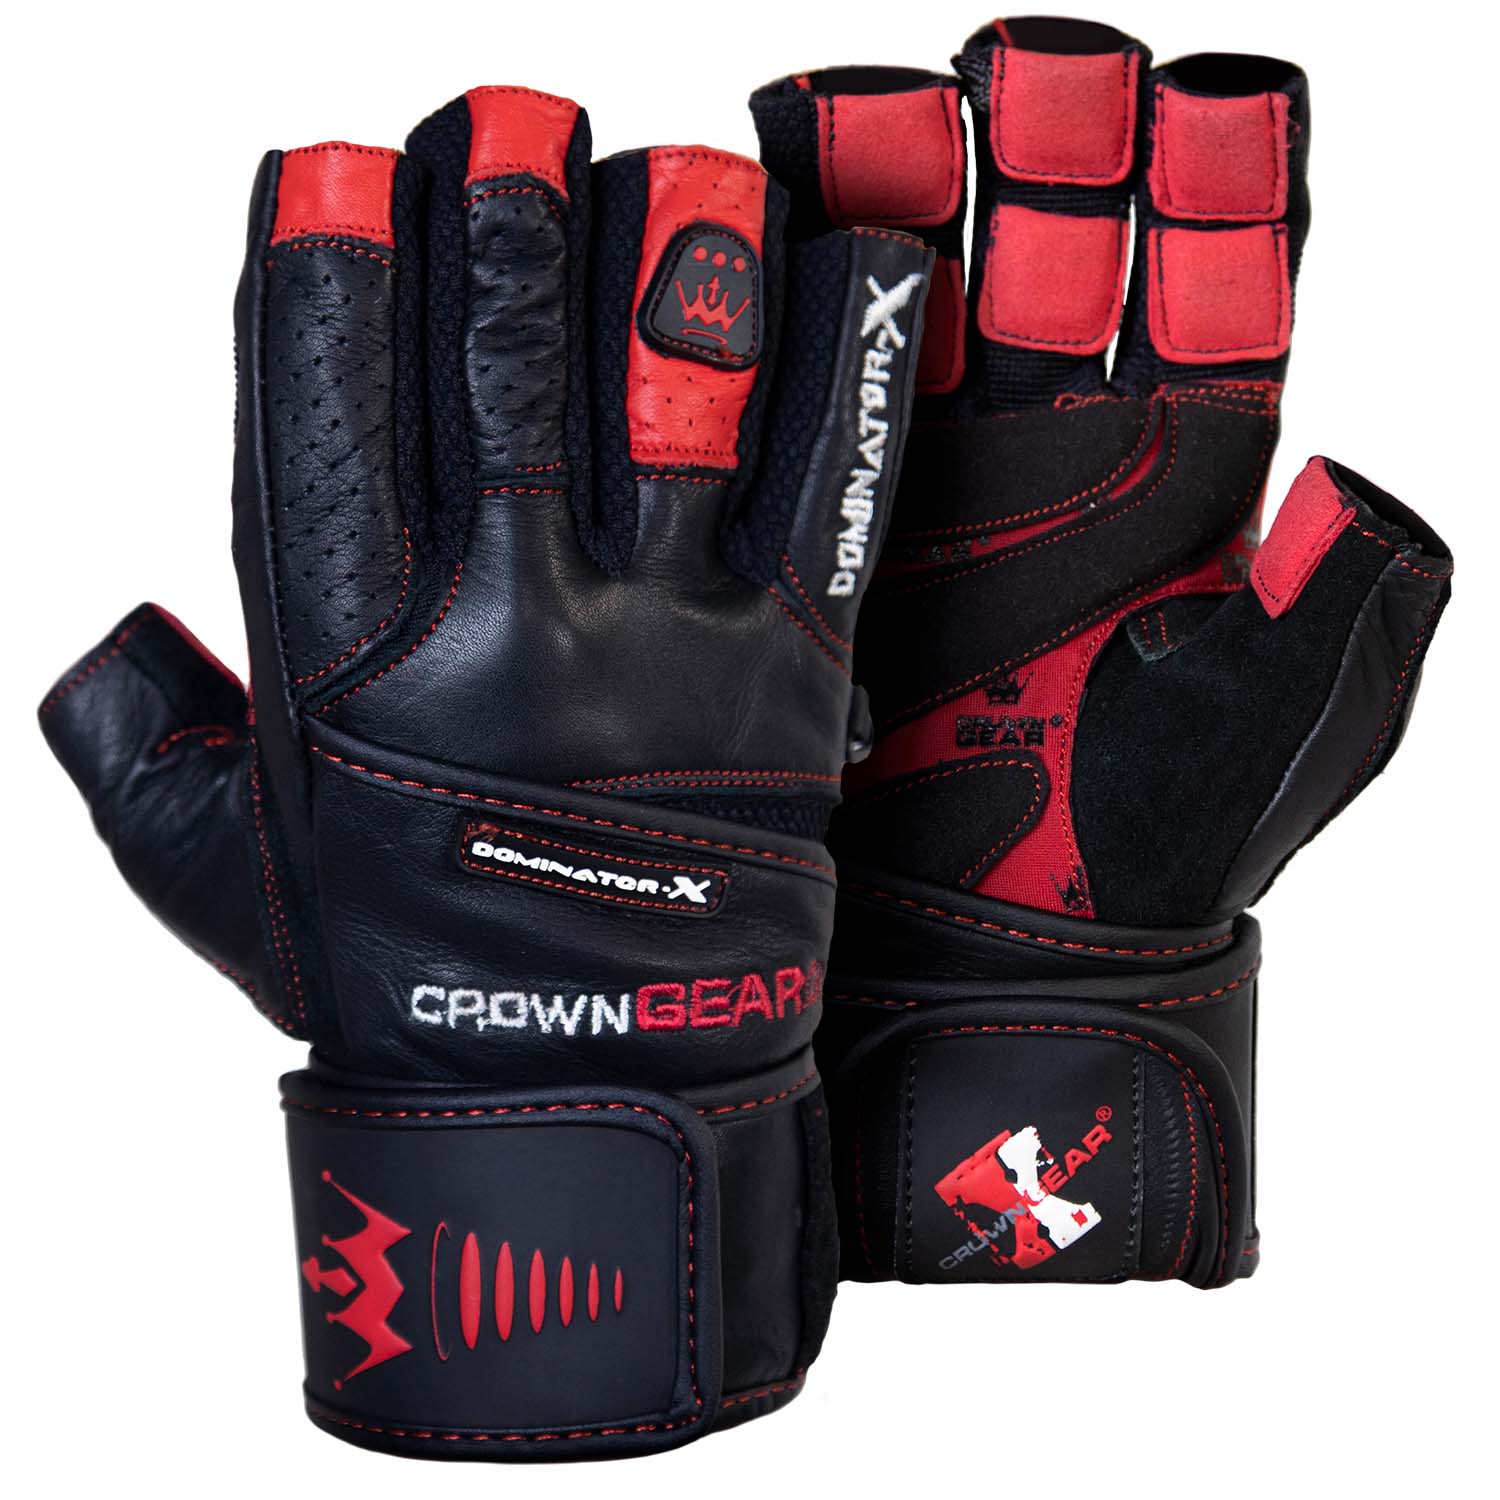  Fitness Workout Gloves Gym Weight Lifting Gloves for